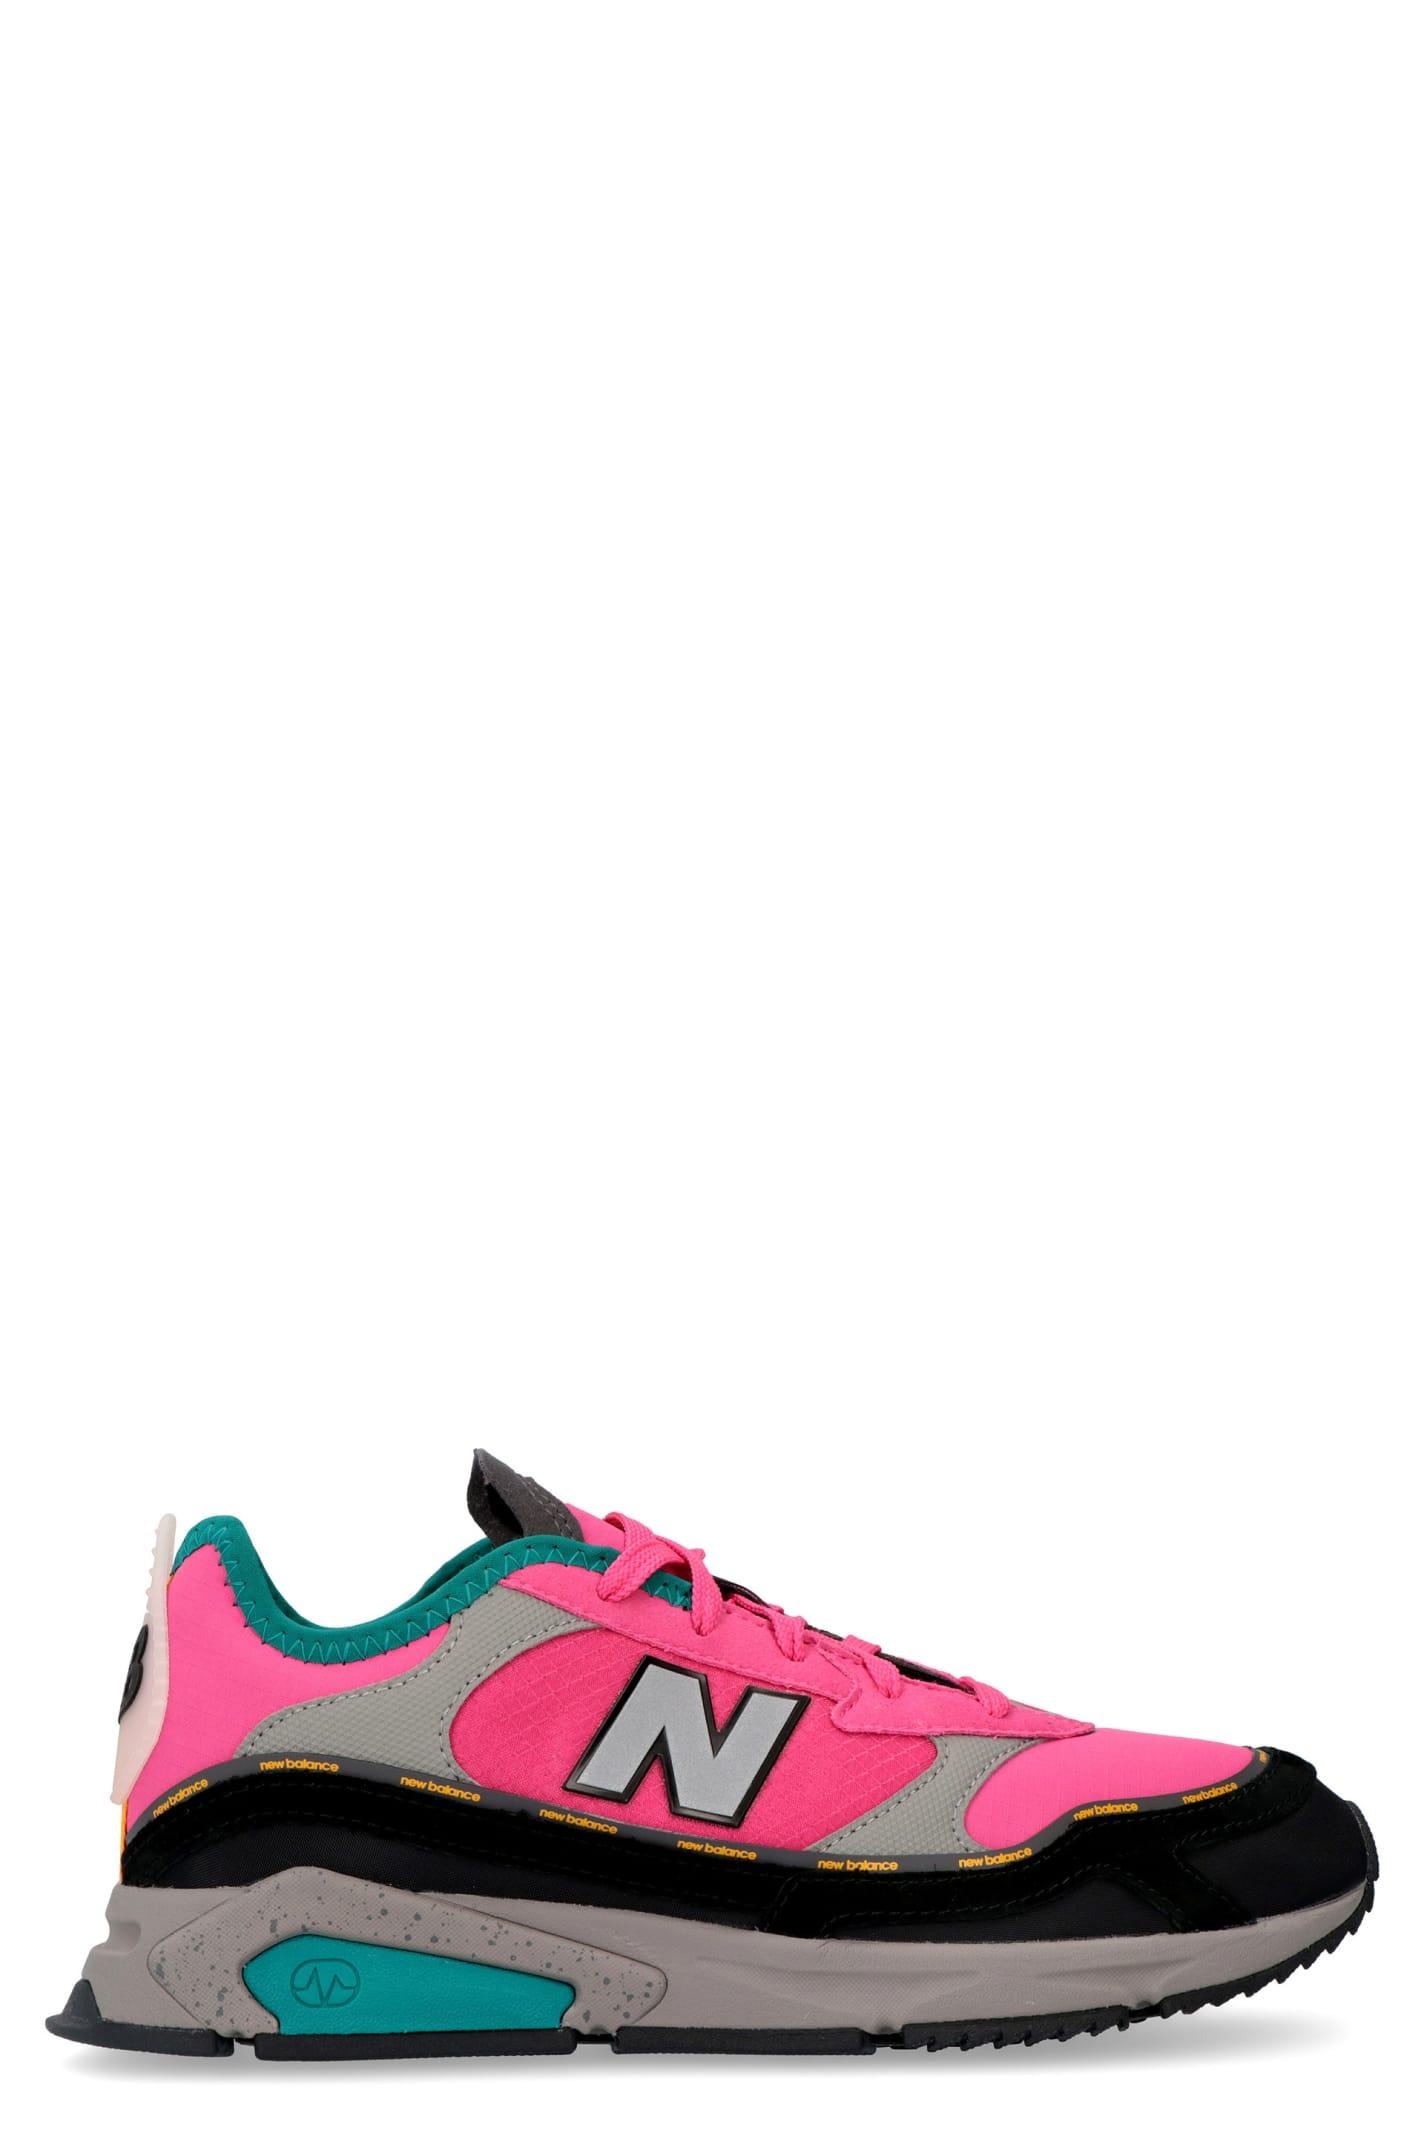 New Balance X-racer Low-top Sneakers in Fuchsia (Pink) - Save 38% | Lyst